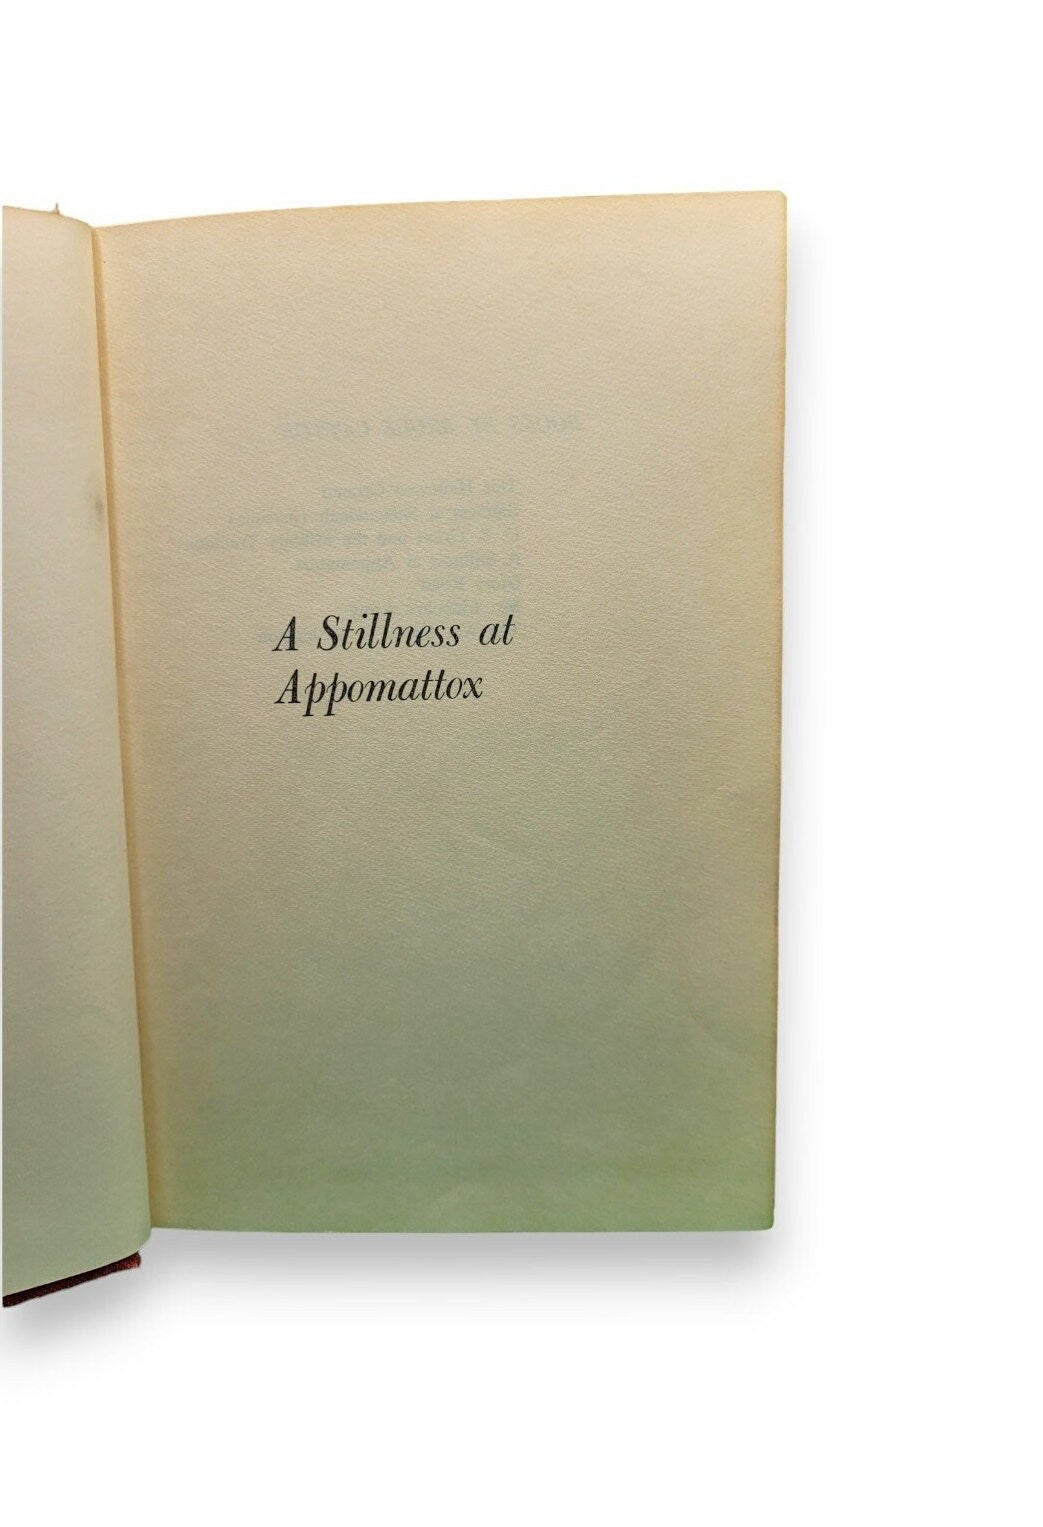 The Army of the Potomac: A Stillness at Appomattox by Bruce Catton 1953